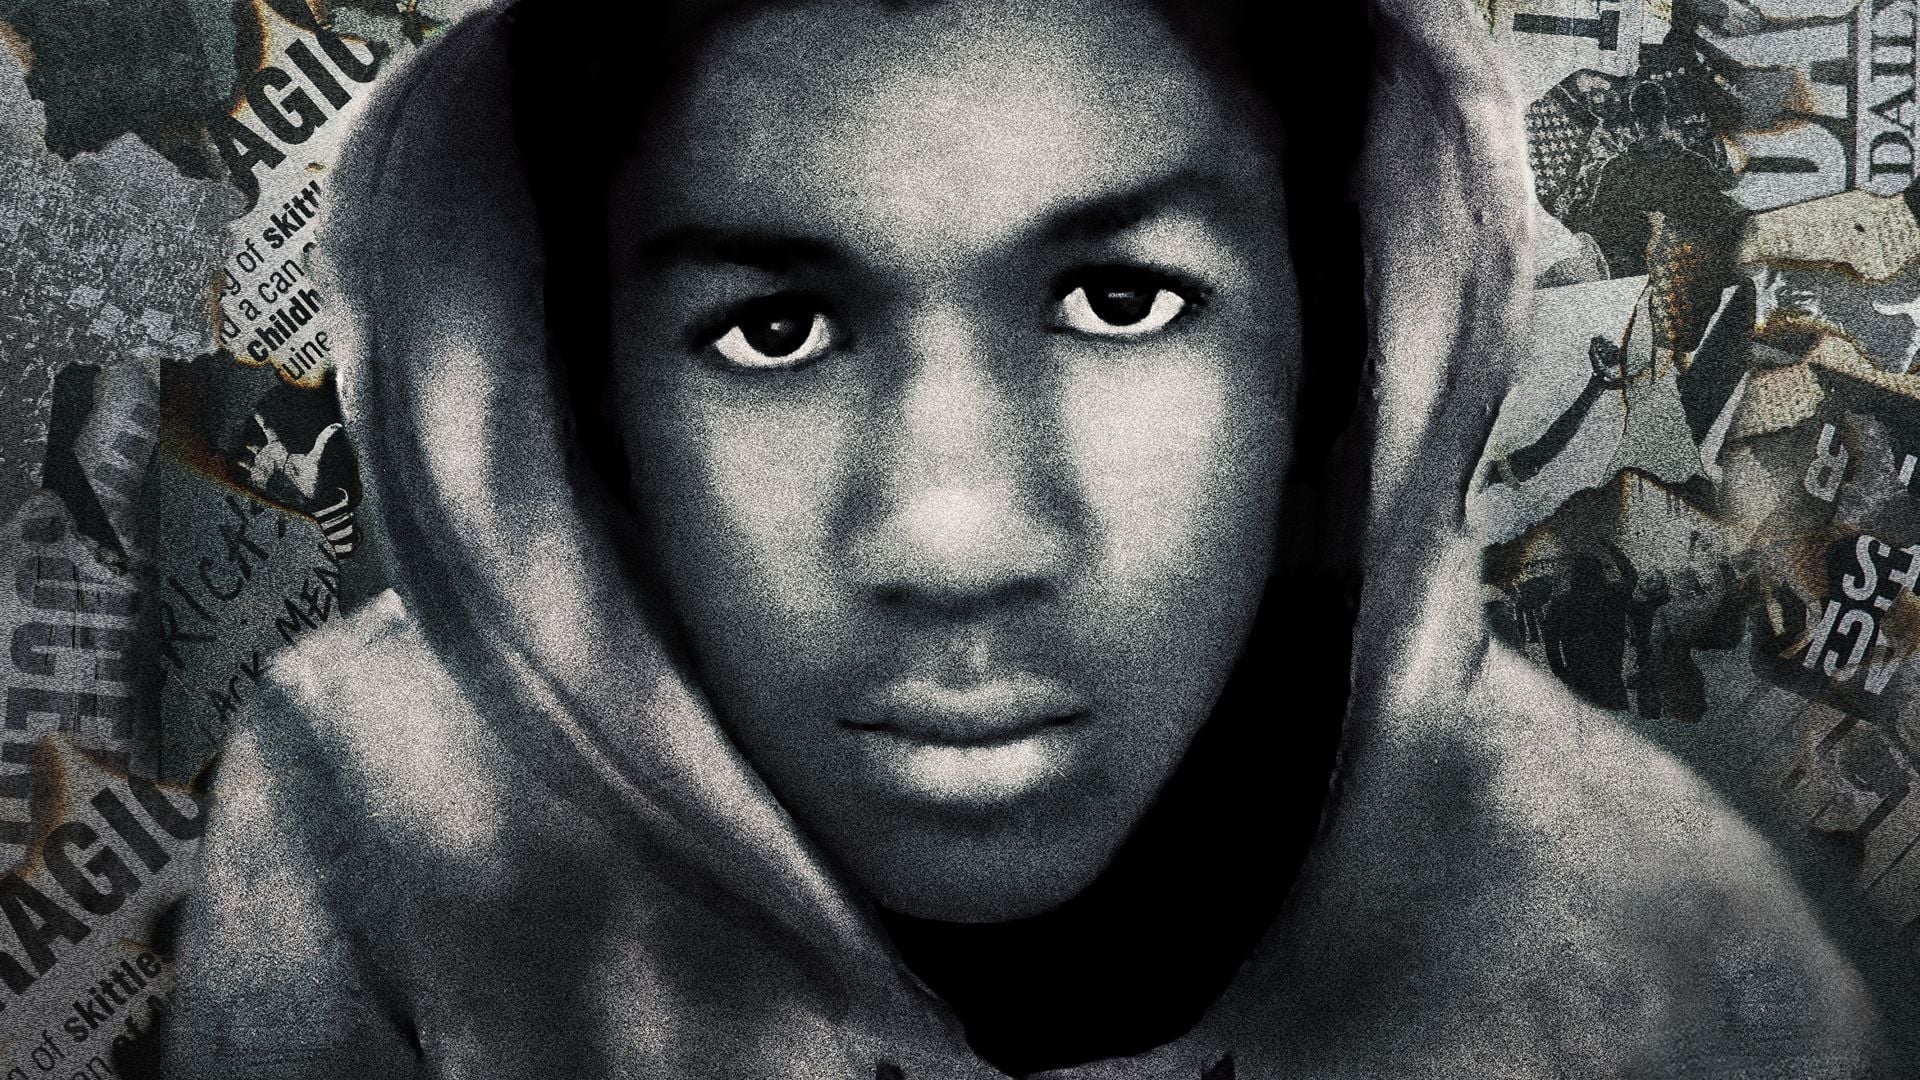 Rest in Power: The Trayvon Martin Story1920 x 1080